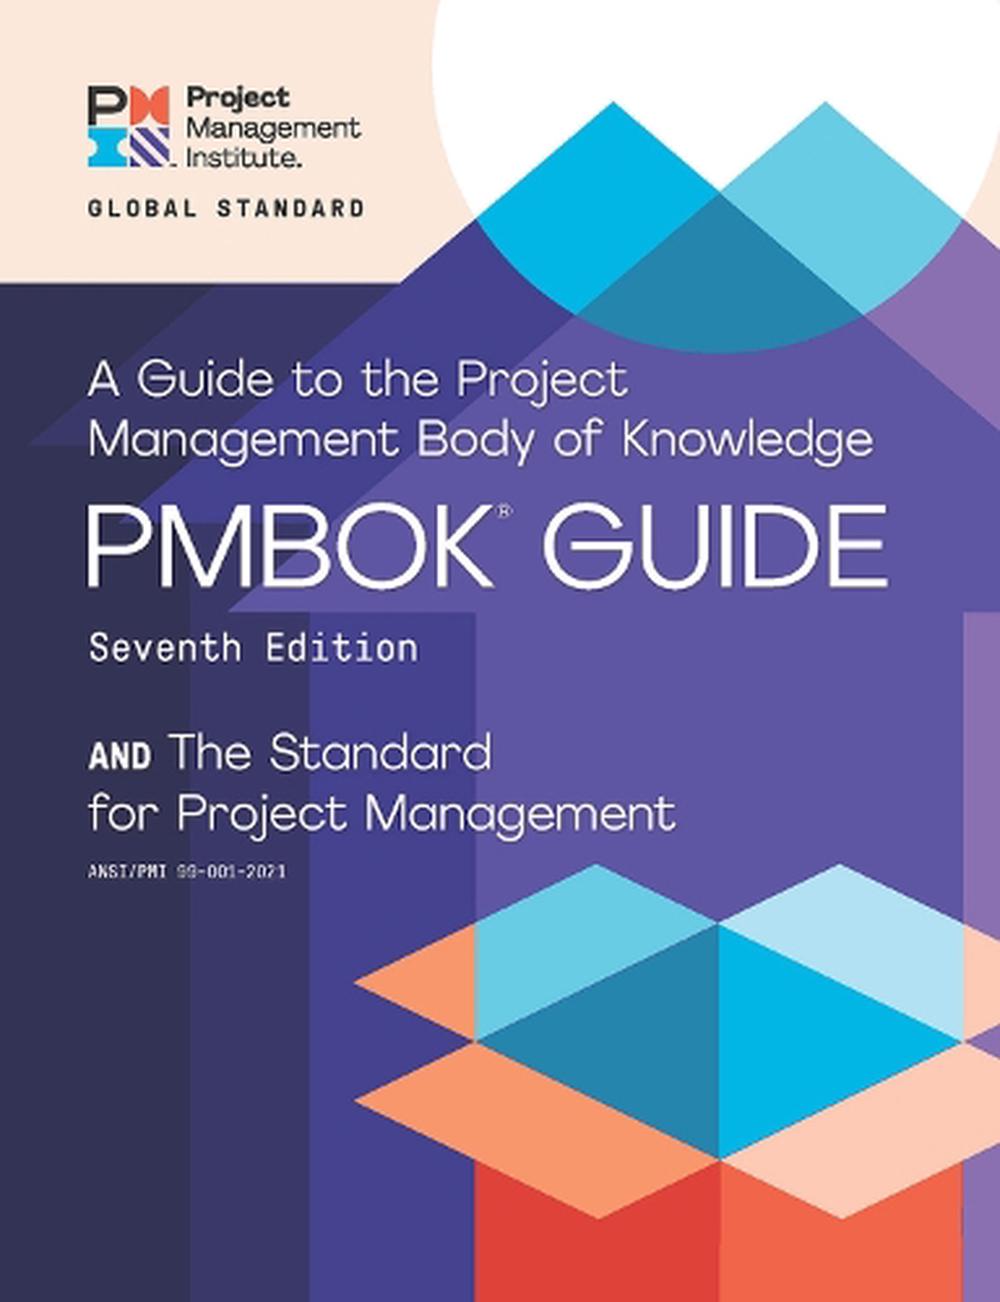 A guide to the Project Management Body of Knowledge (PMBOK guide) and